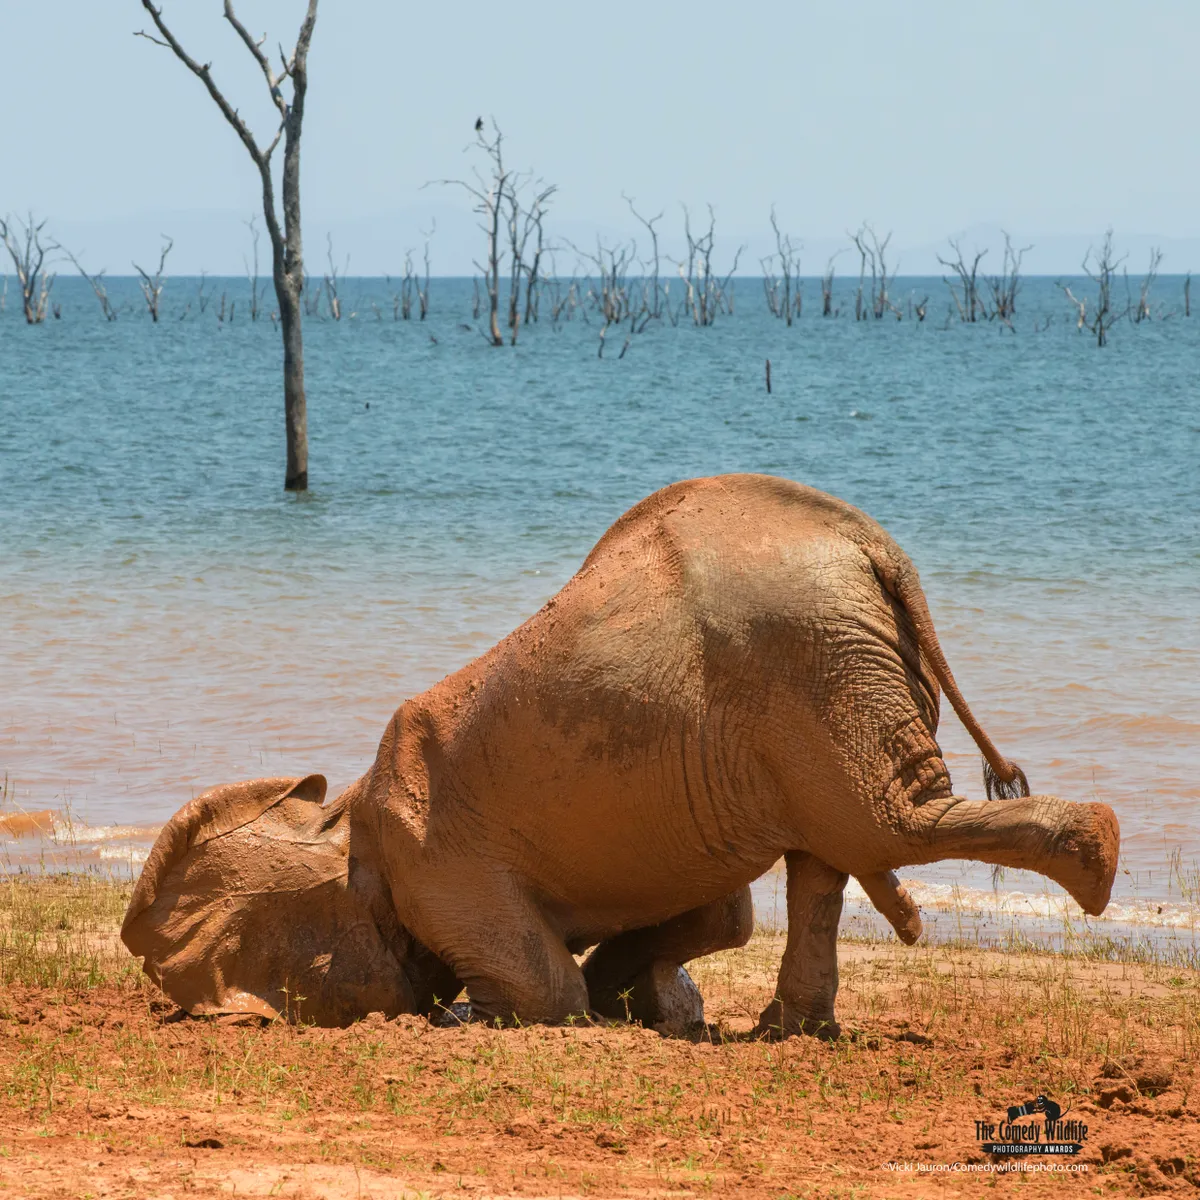 In front of a blue lake (with dead trees sticking up out of it), a young elephant takes a mud bath, with its front knees and head on the ground, and one of its hind legs in the air.